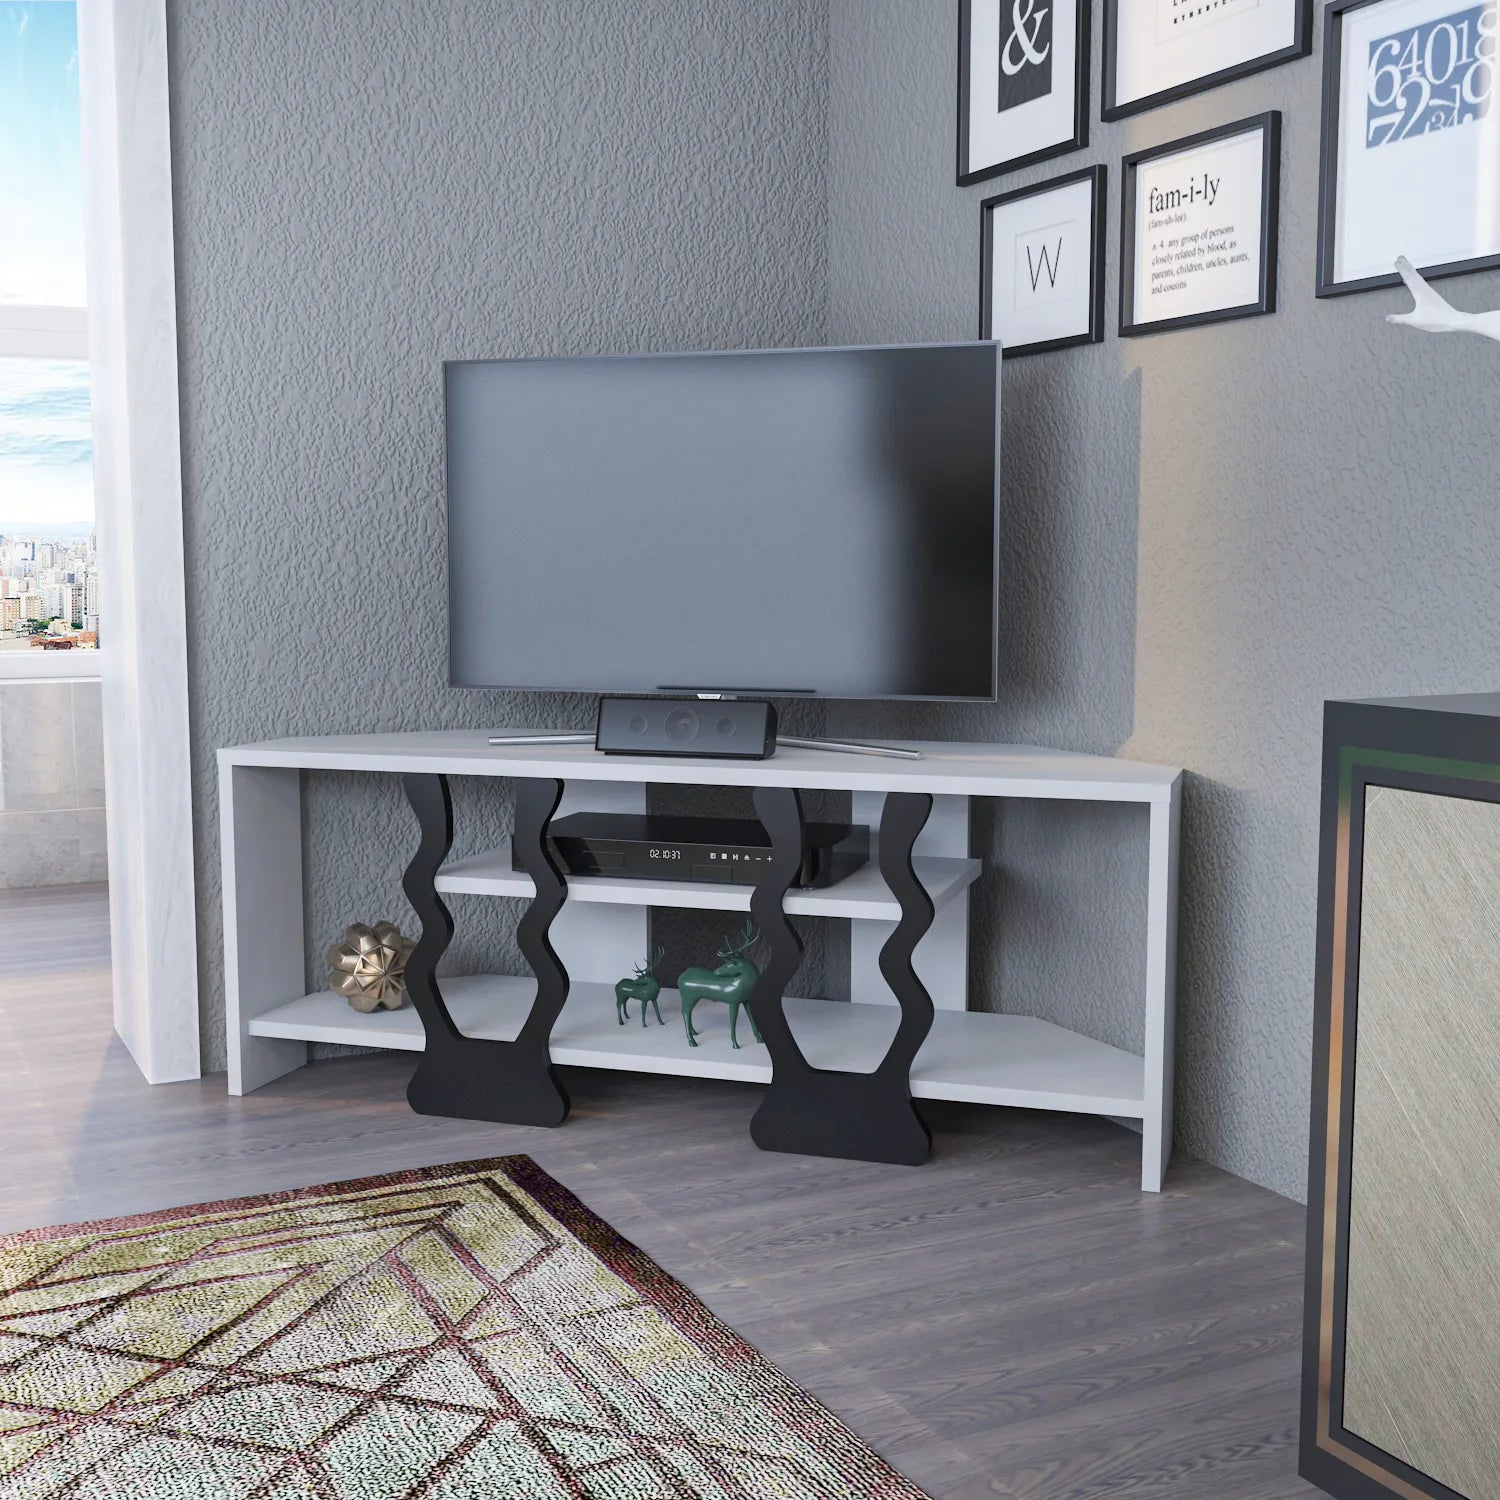 Firal 43 inch Wide Corner TV Stand Media Console for TVs up to 49 inch